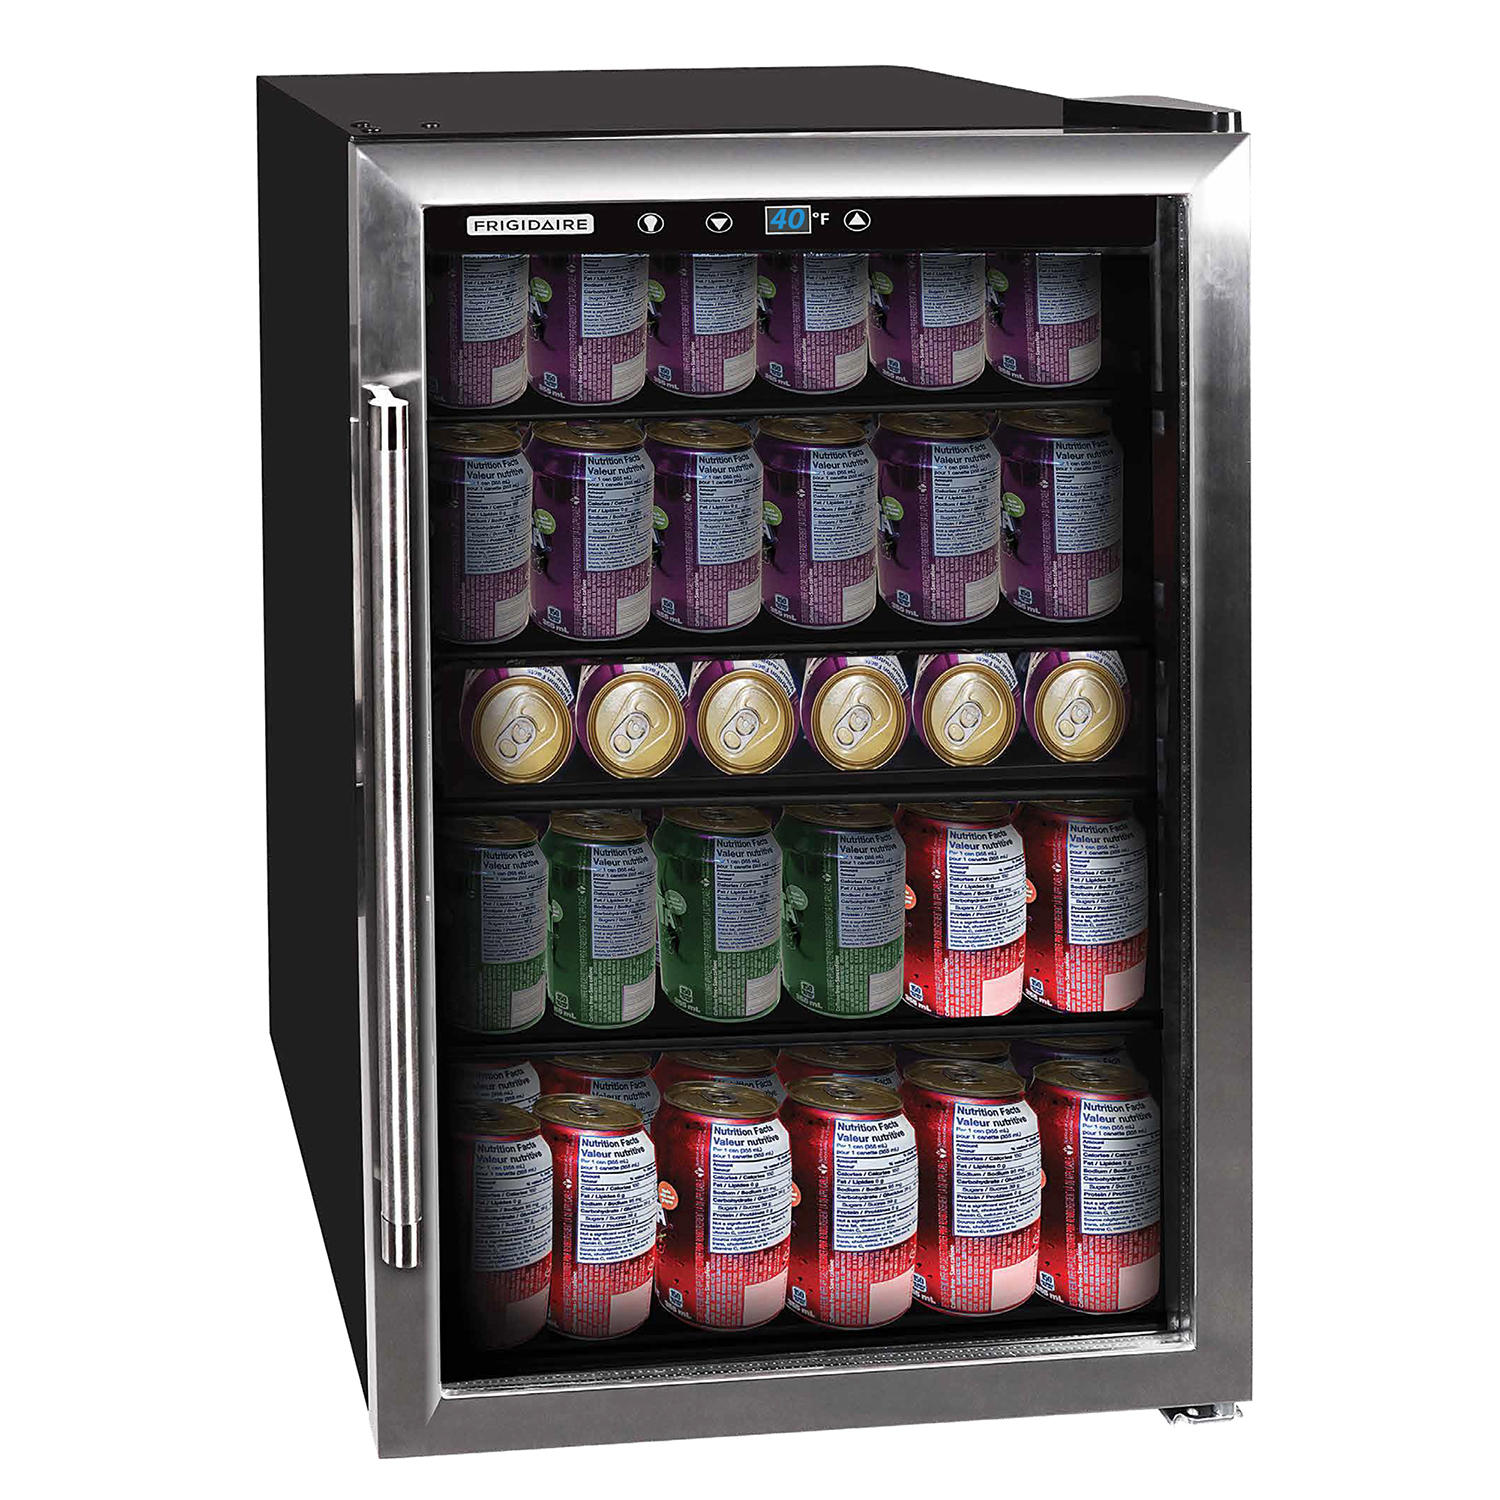 Frigidaire 126 Can Beverage Center - 4.4 Cu Ft - Stainless Steel